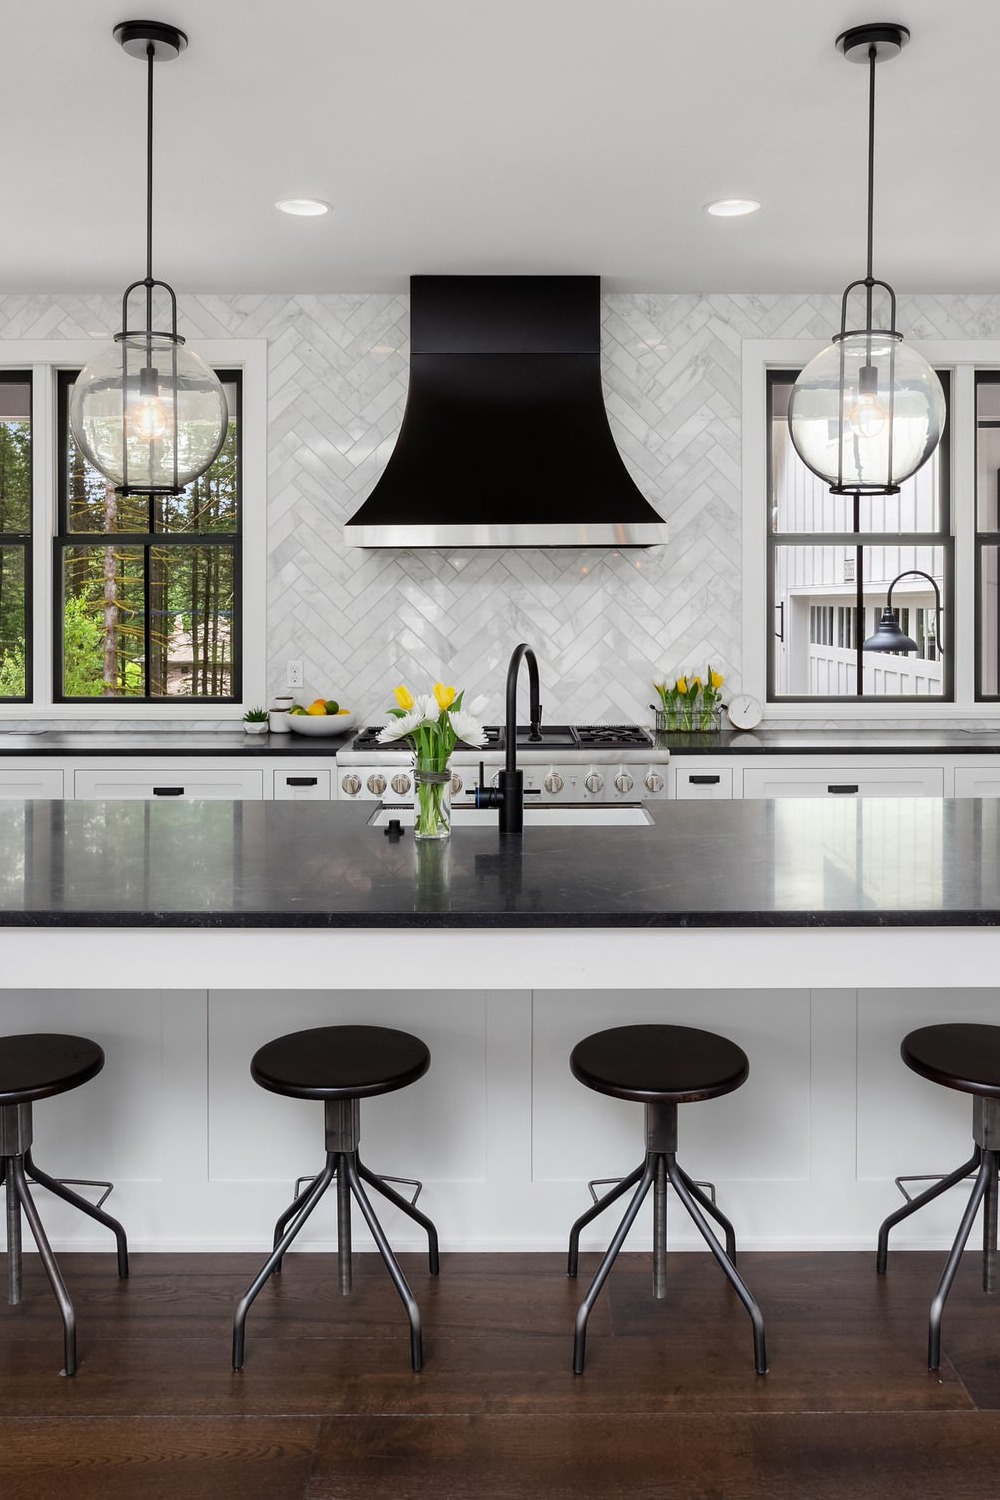 Black Countertops Traditional Kitchen White Kitchen Cabinets With Black Gorgeous Contemporary Kitchen With White Cabinets Light Wood Floor Ceramic Backsplash